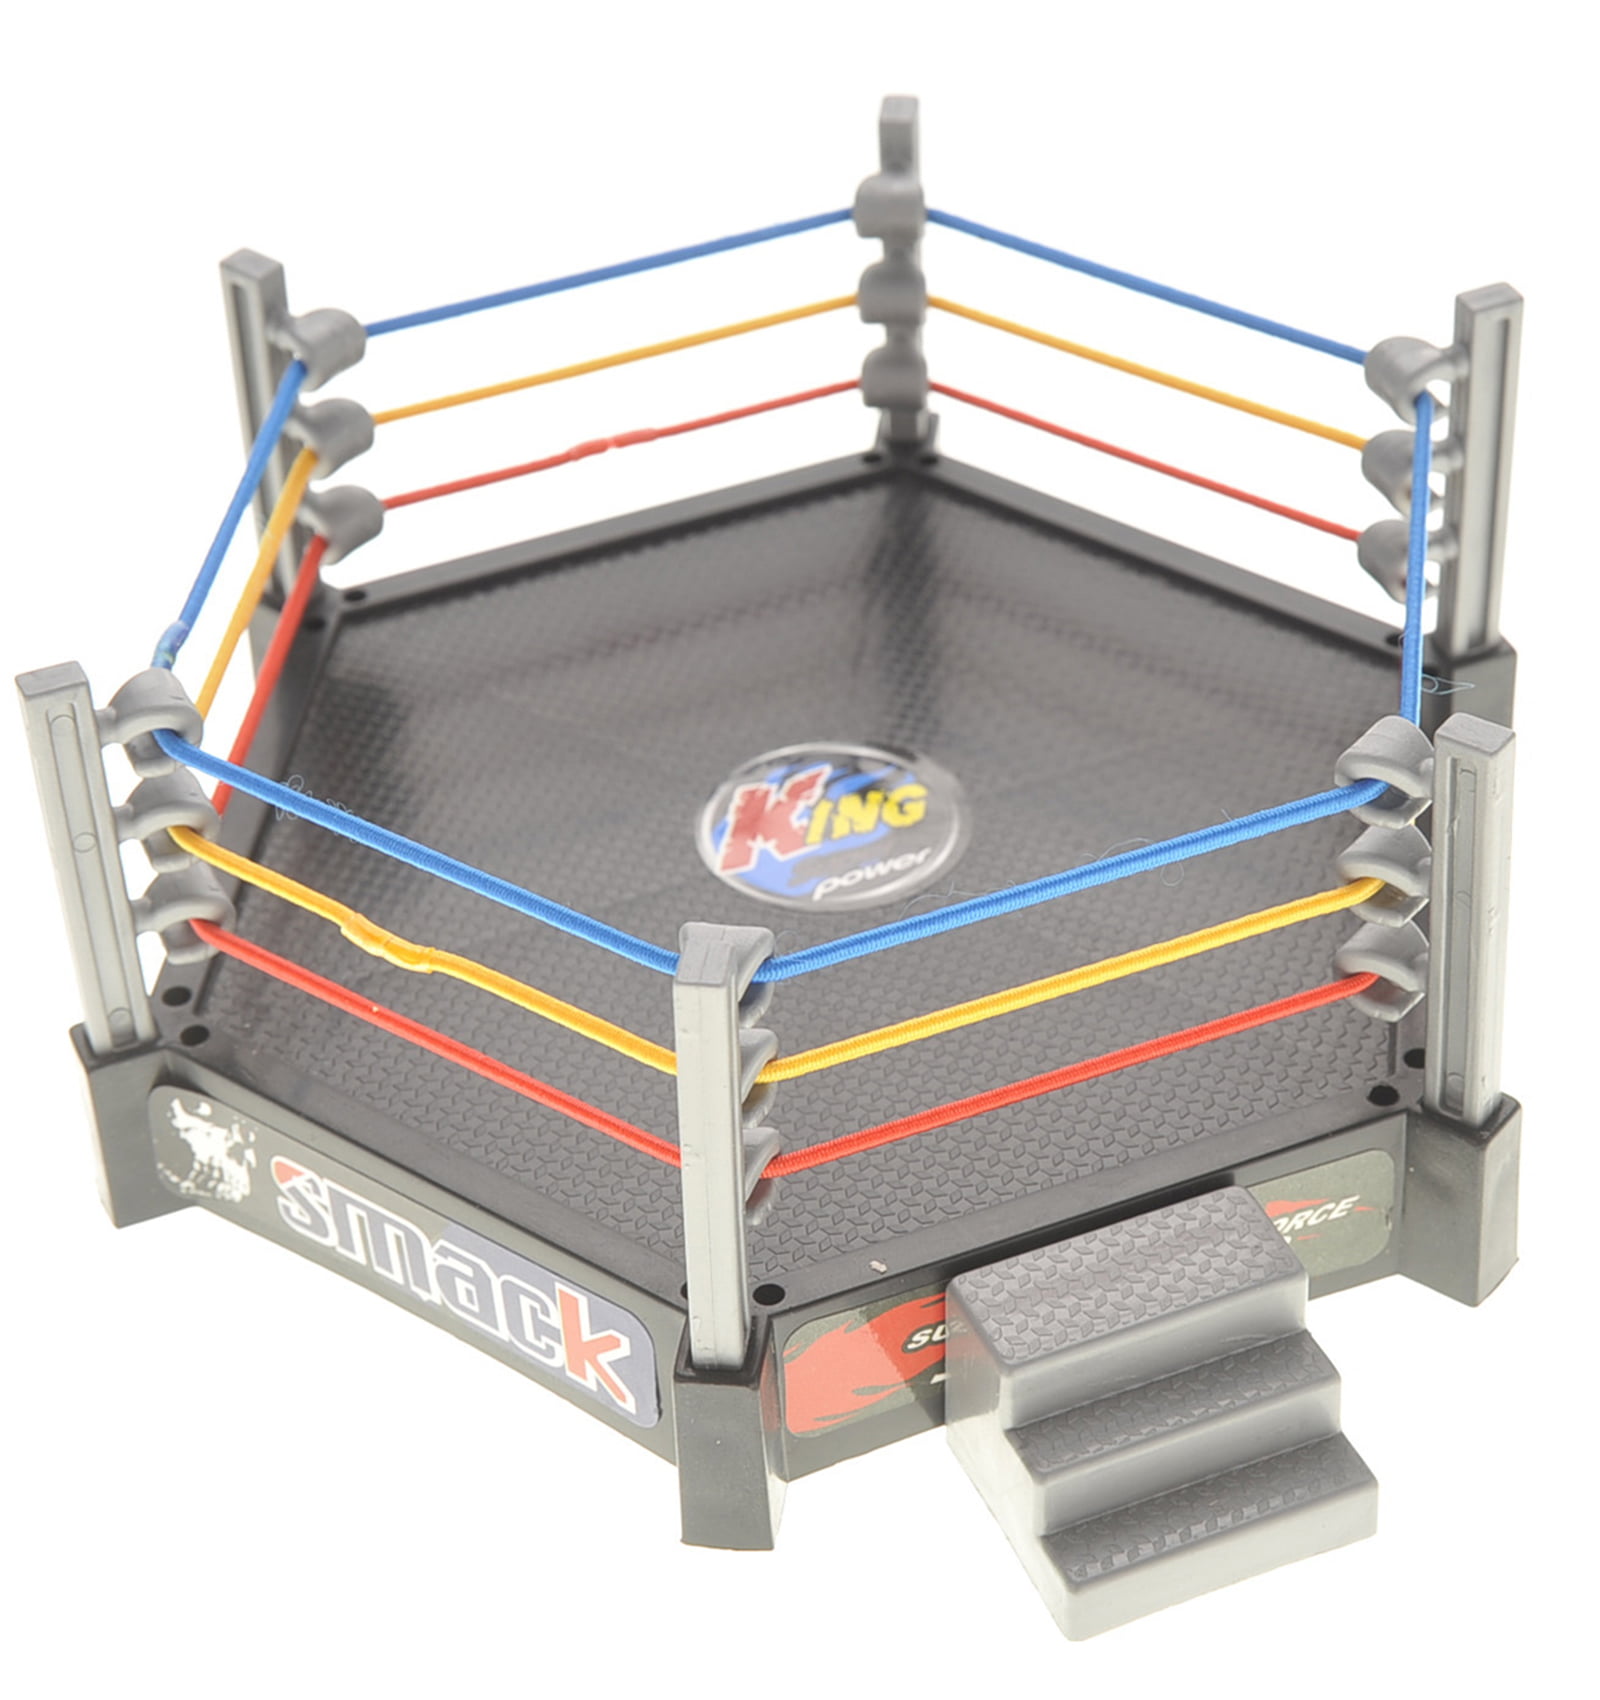 SDMAX WWE Wrestling Ring Playset with Action Figures, WWE Ring with  Equipment's Toy for Kids Boys, Ideal for Birthday Gift, Safe and Durable